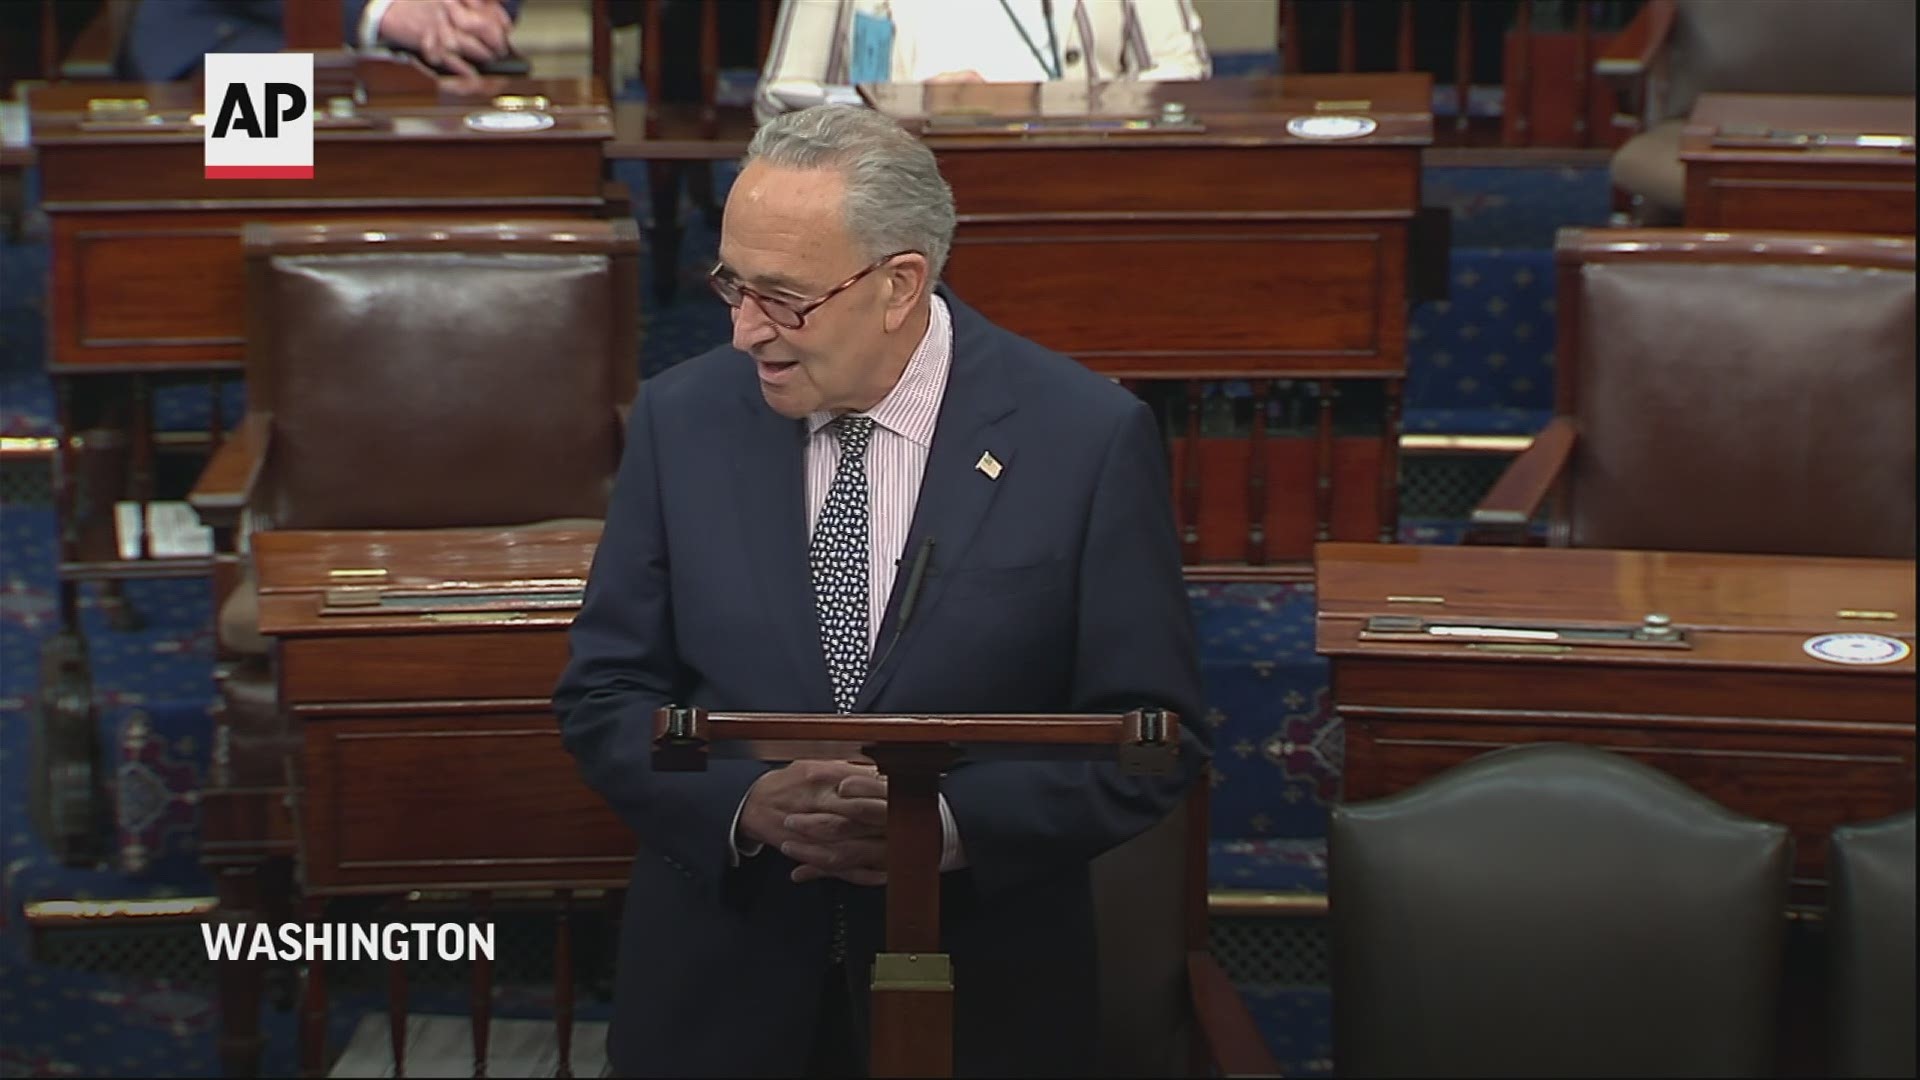 Senate Minority Leader Chuck Schumer excoriated Senate Republicans over the deadlock on providing additional relief to deal with the coronavirus pandemic.